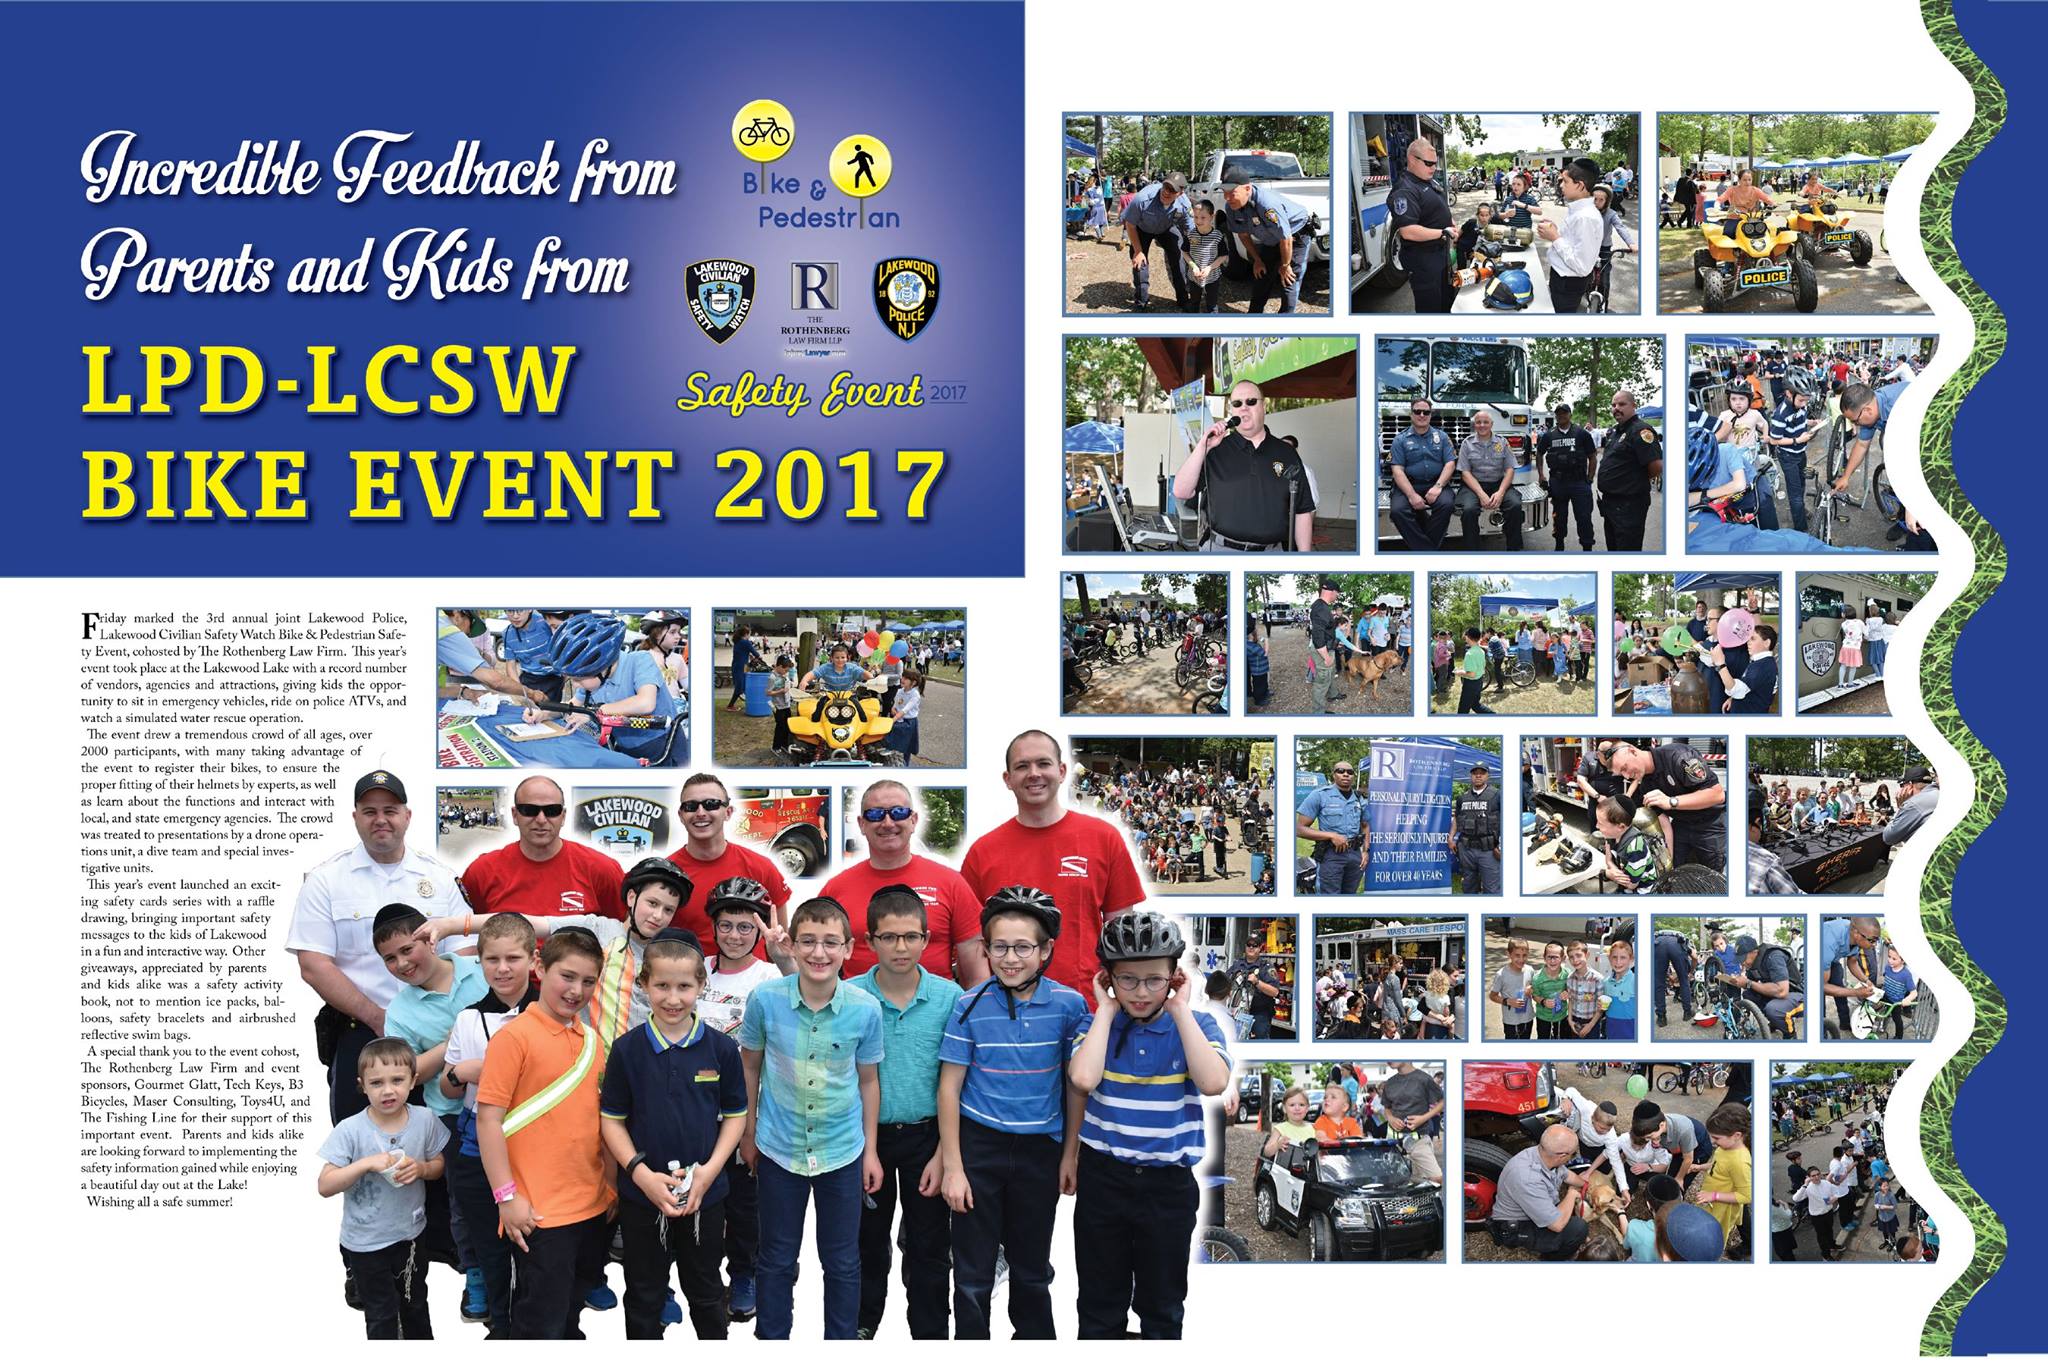 LPD-LCSW BIKE EVENT 2017